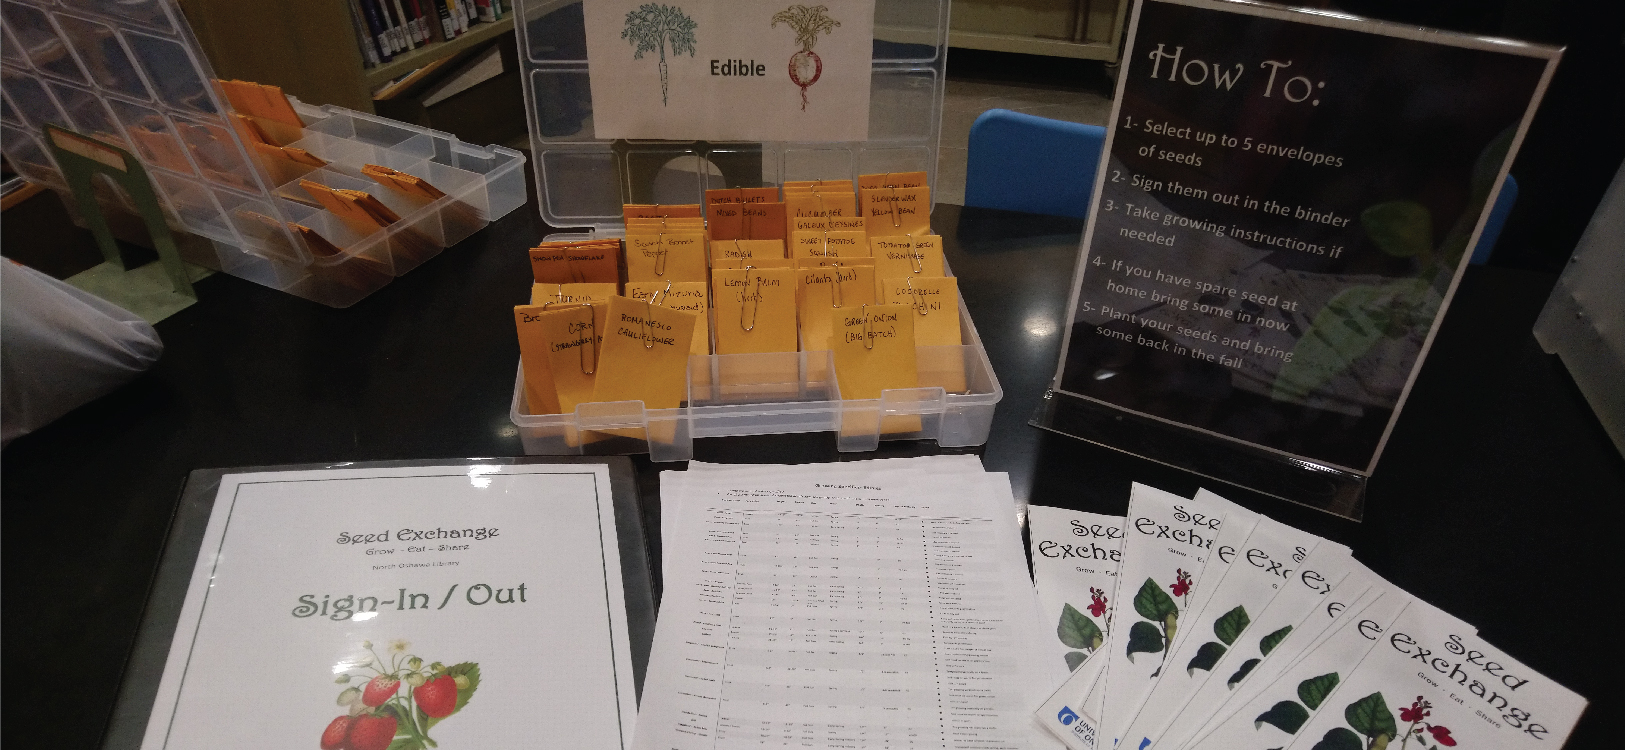 seed exchange display at the library